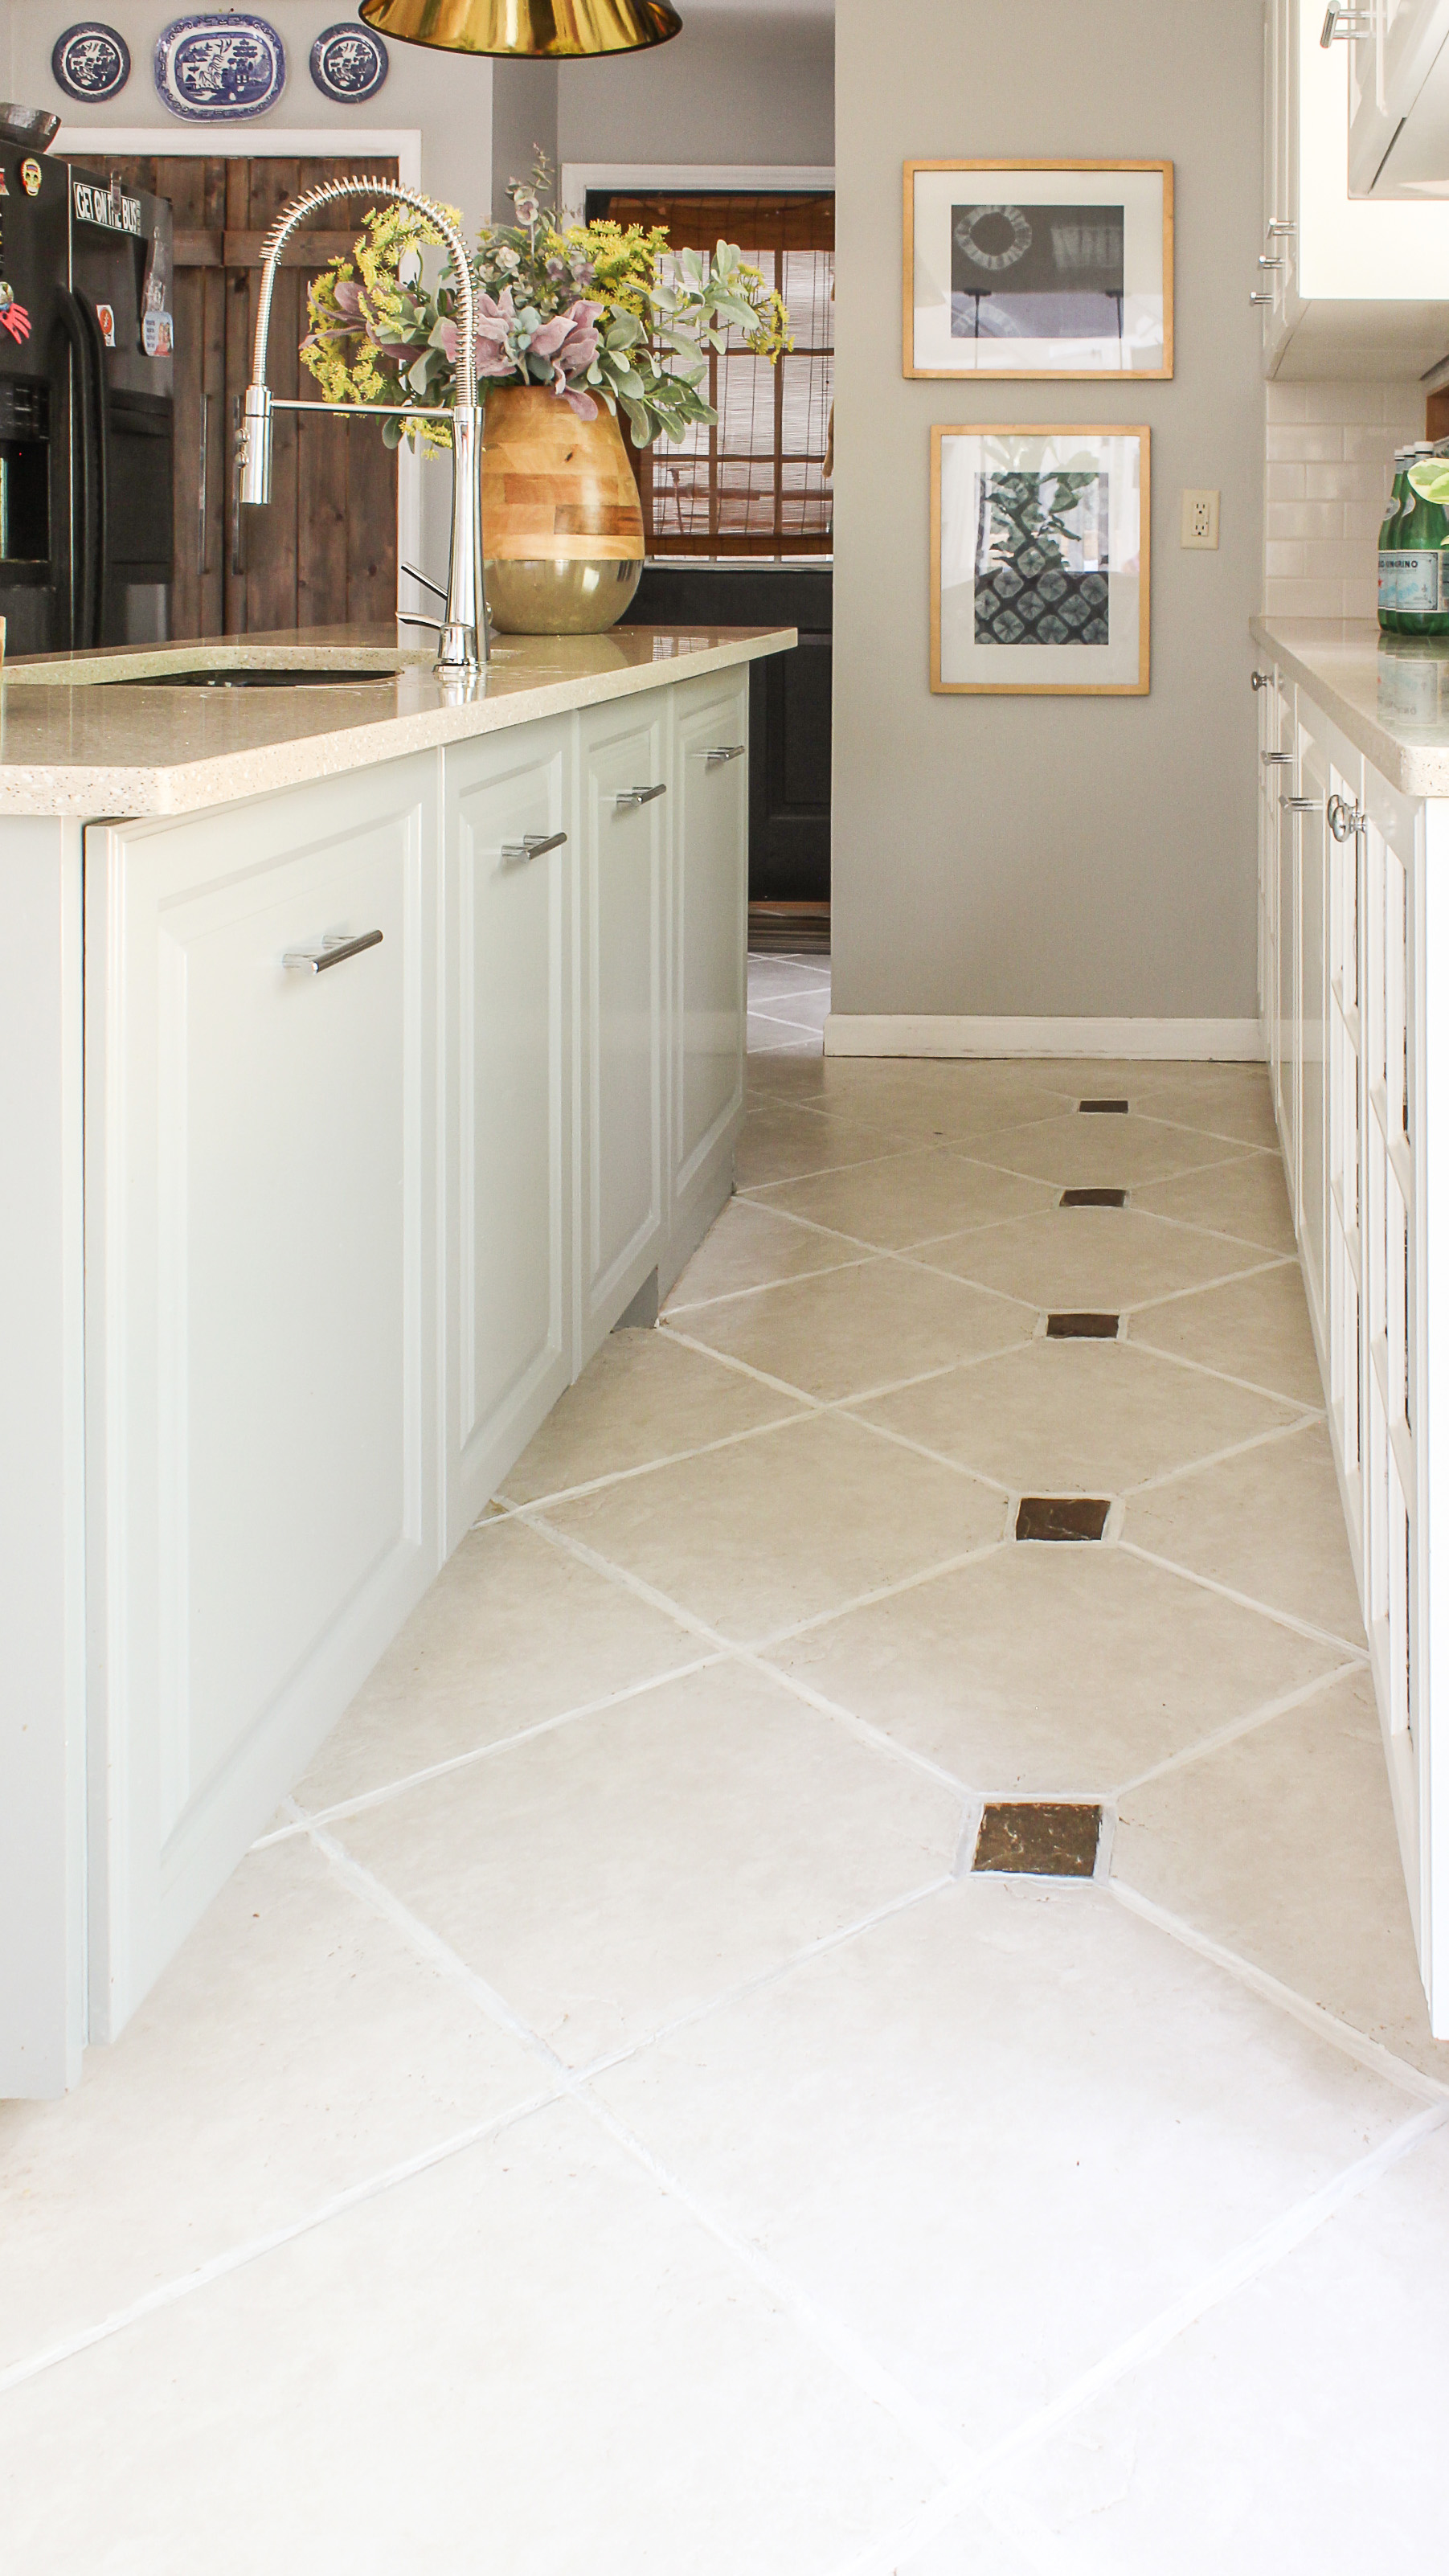 Neglected Tile Flooring, How To Clean Vintage Ceramic Tile Floors